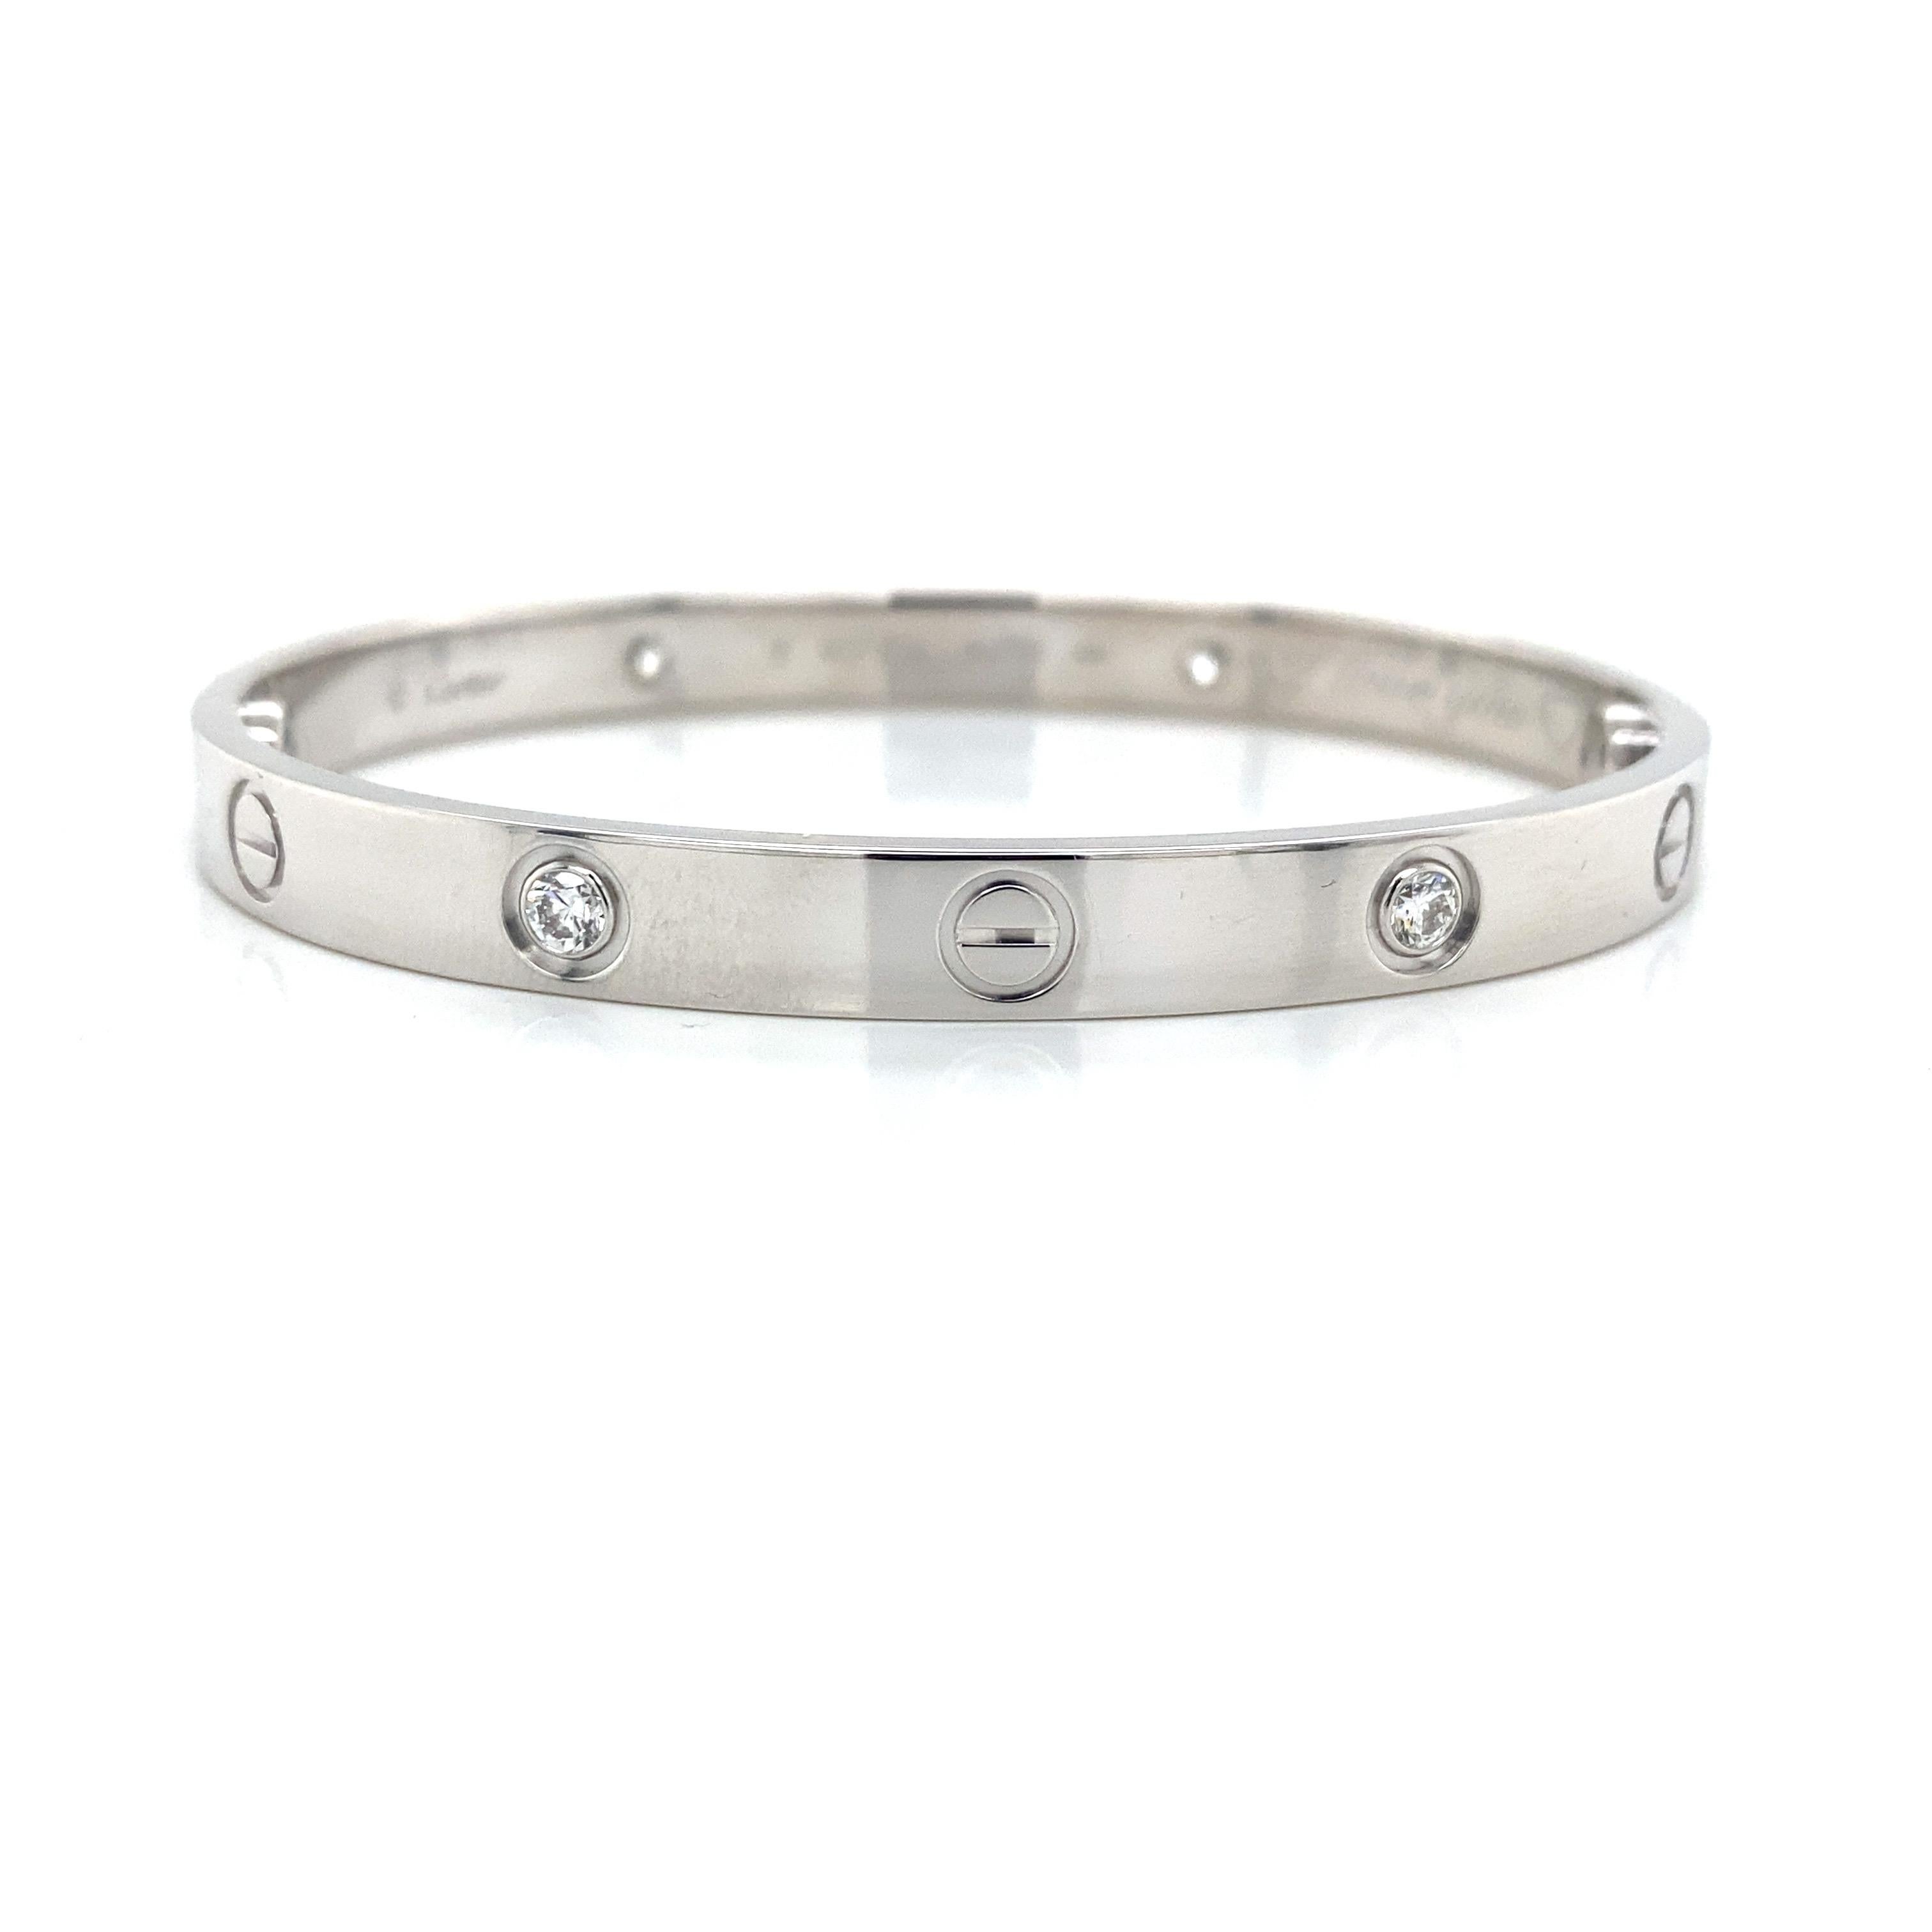 Cartier Love Bracelet in 18K White Gold.  (4) Round Brilliant Cut Diamonds weighing 0.42 carat total weight, F-G in color, VVS1 are bezel set in this classic Bangle.  Size 17.  36 grams.   Screwdriver and Cartier Certificate papers included. 